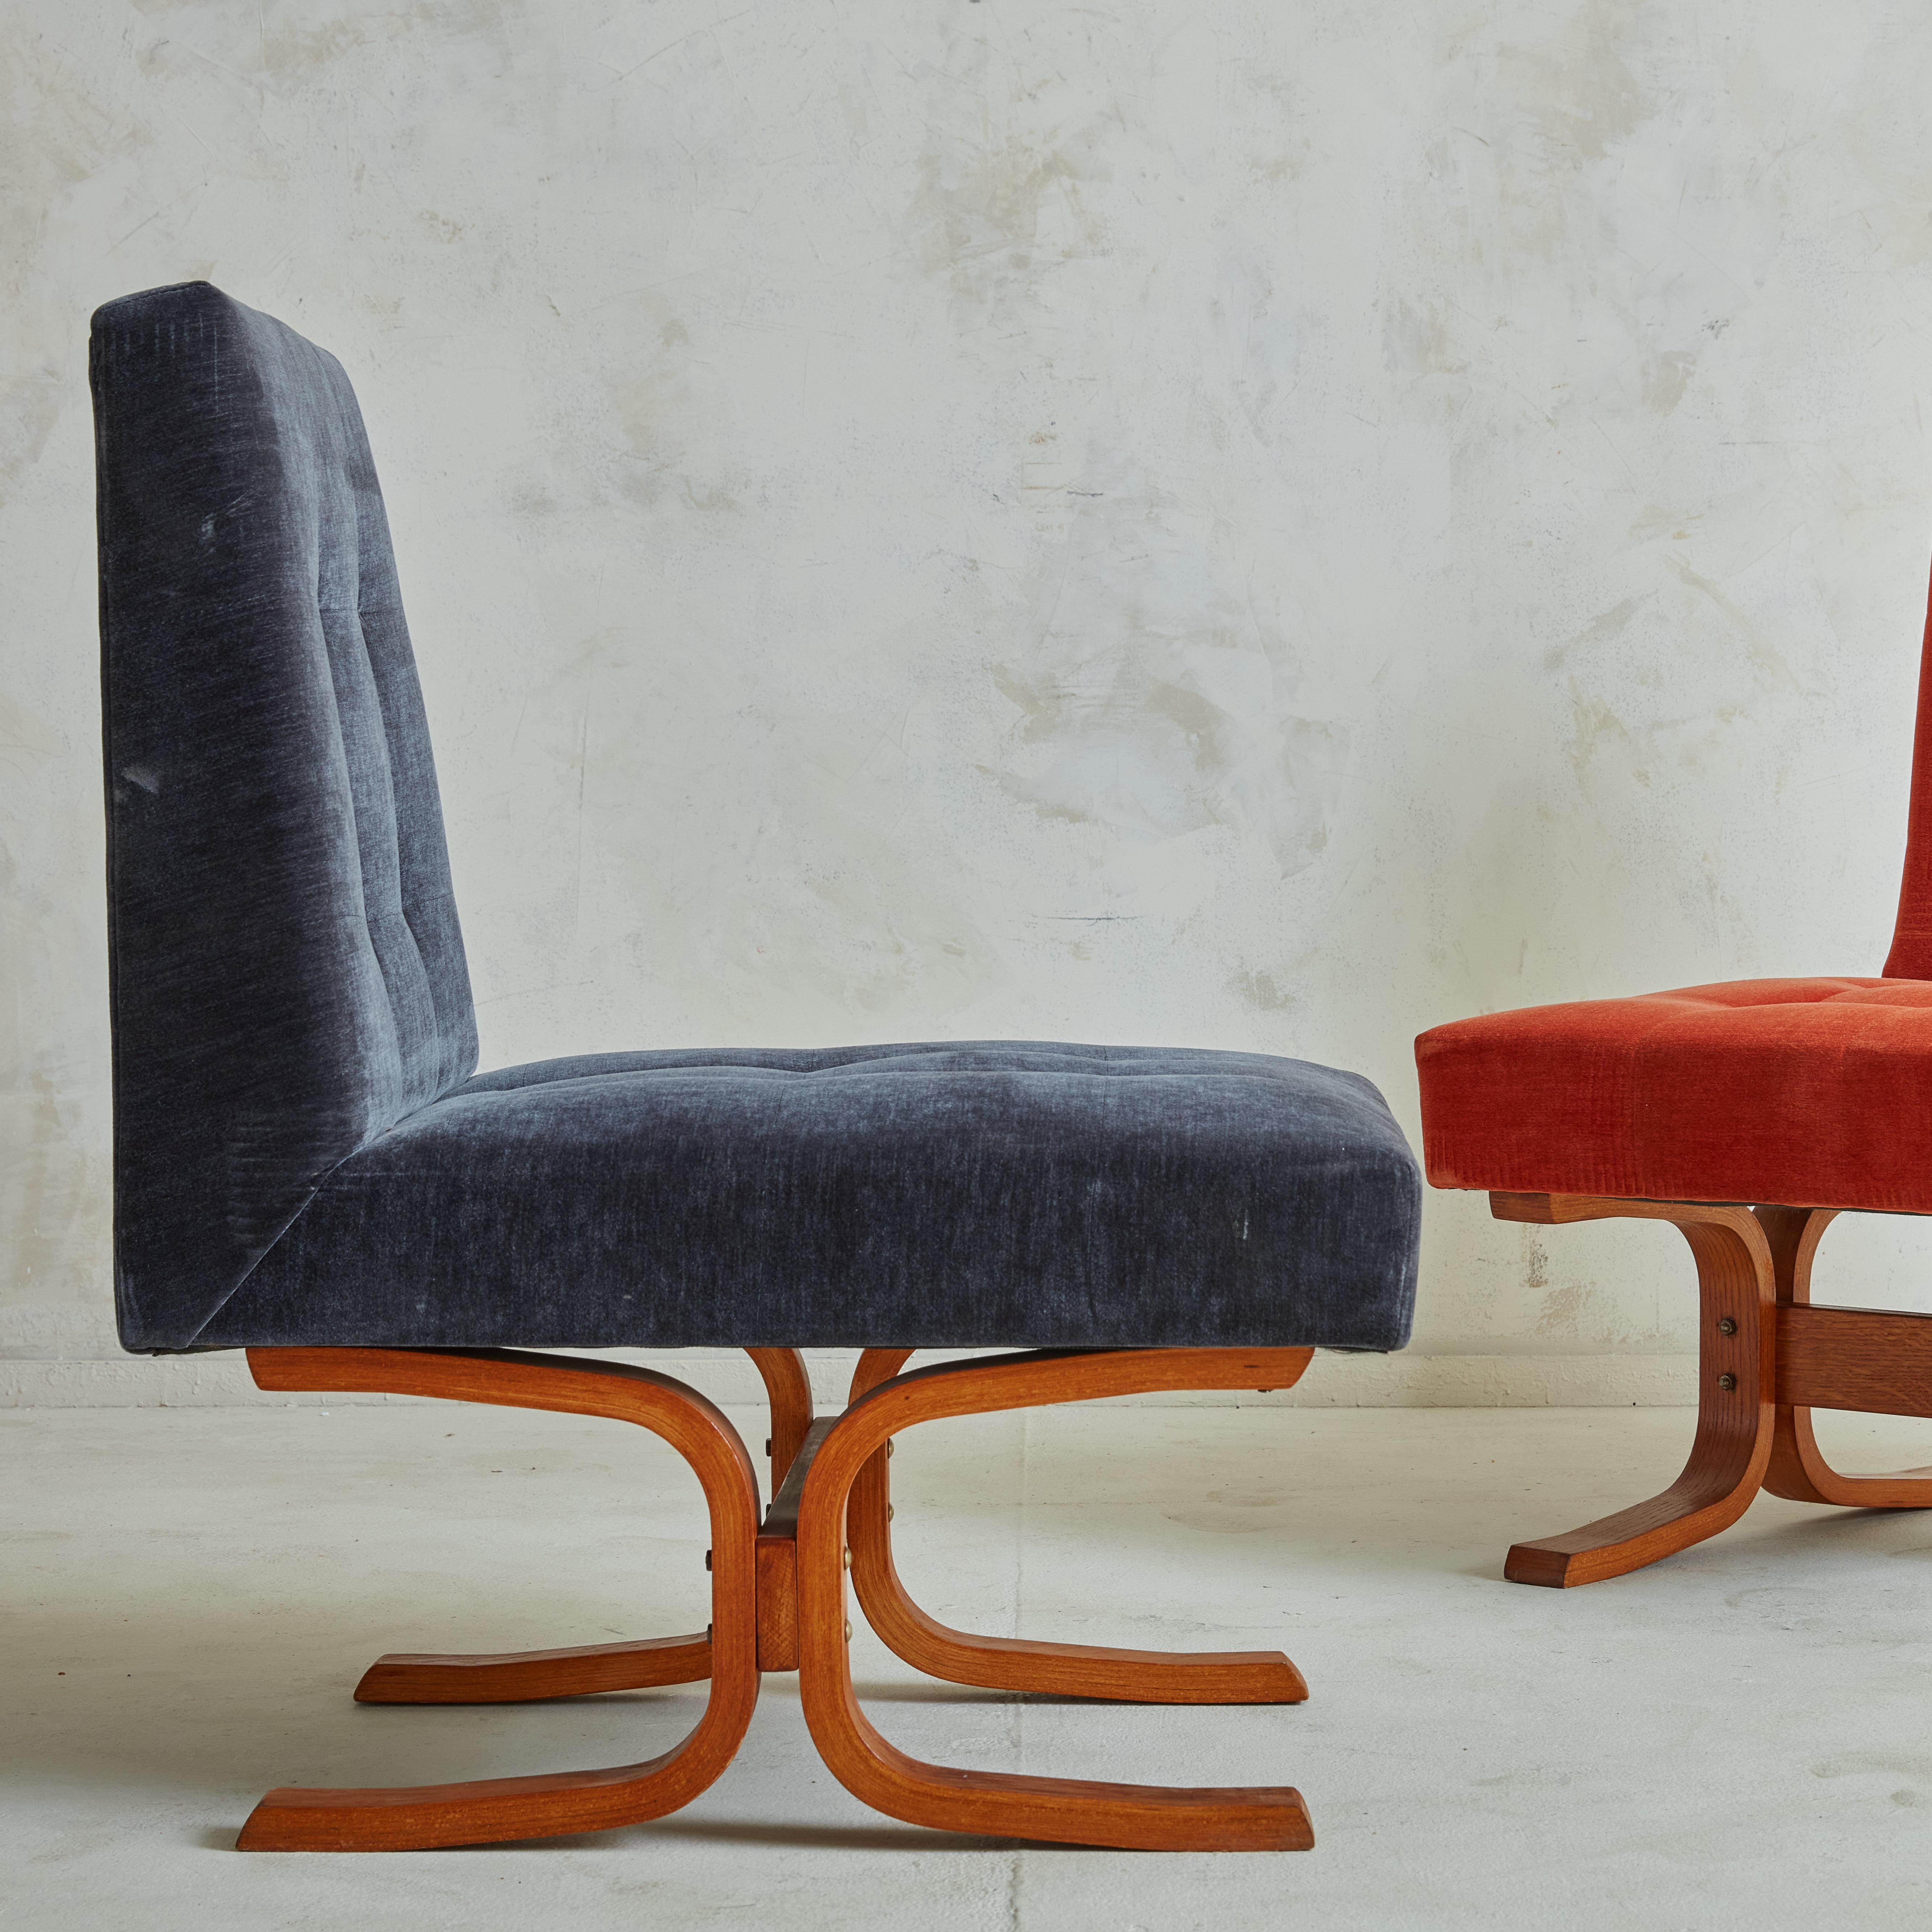 Mid-20th Century Bratislava Lounge Chairs by Jindrich Volak for Drevopodnik Holesov - 2 Available For Sale